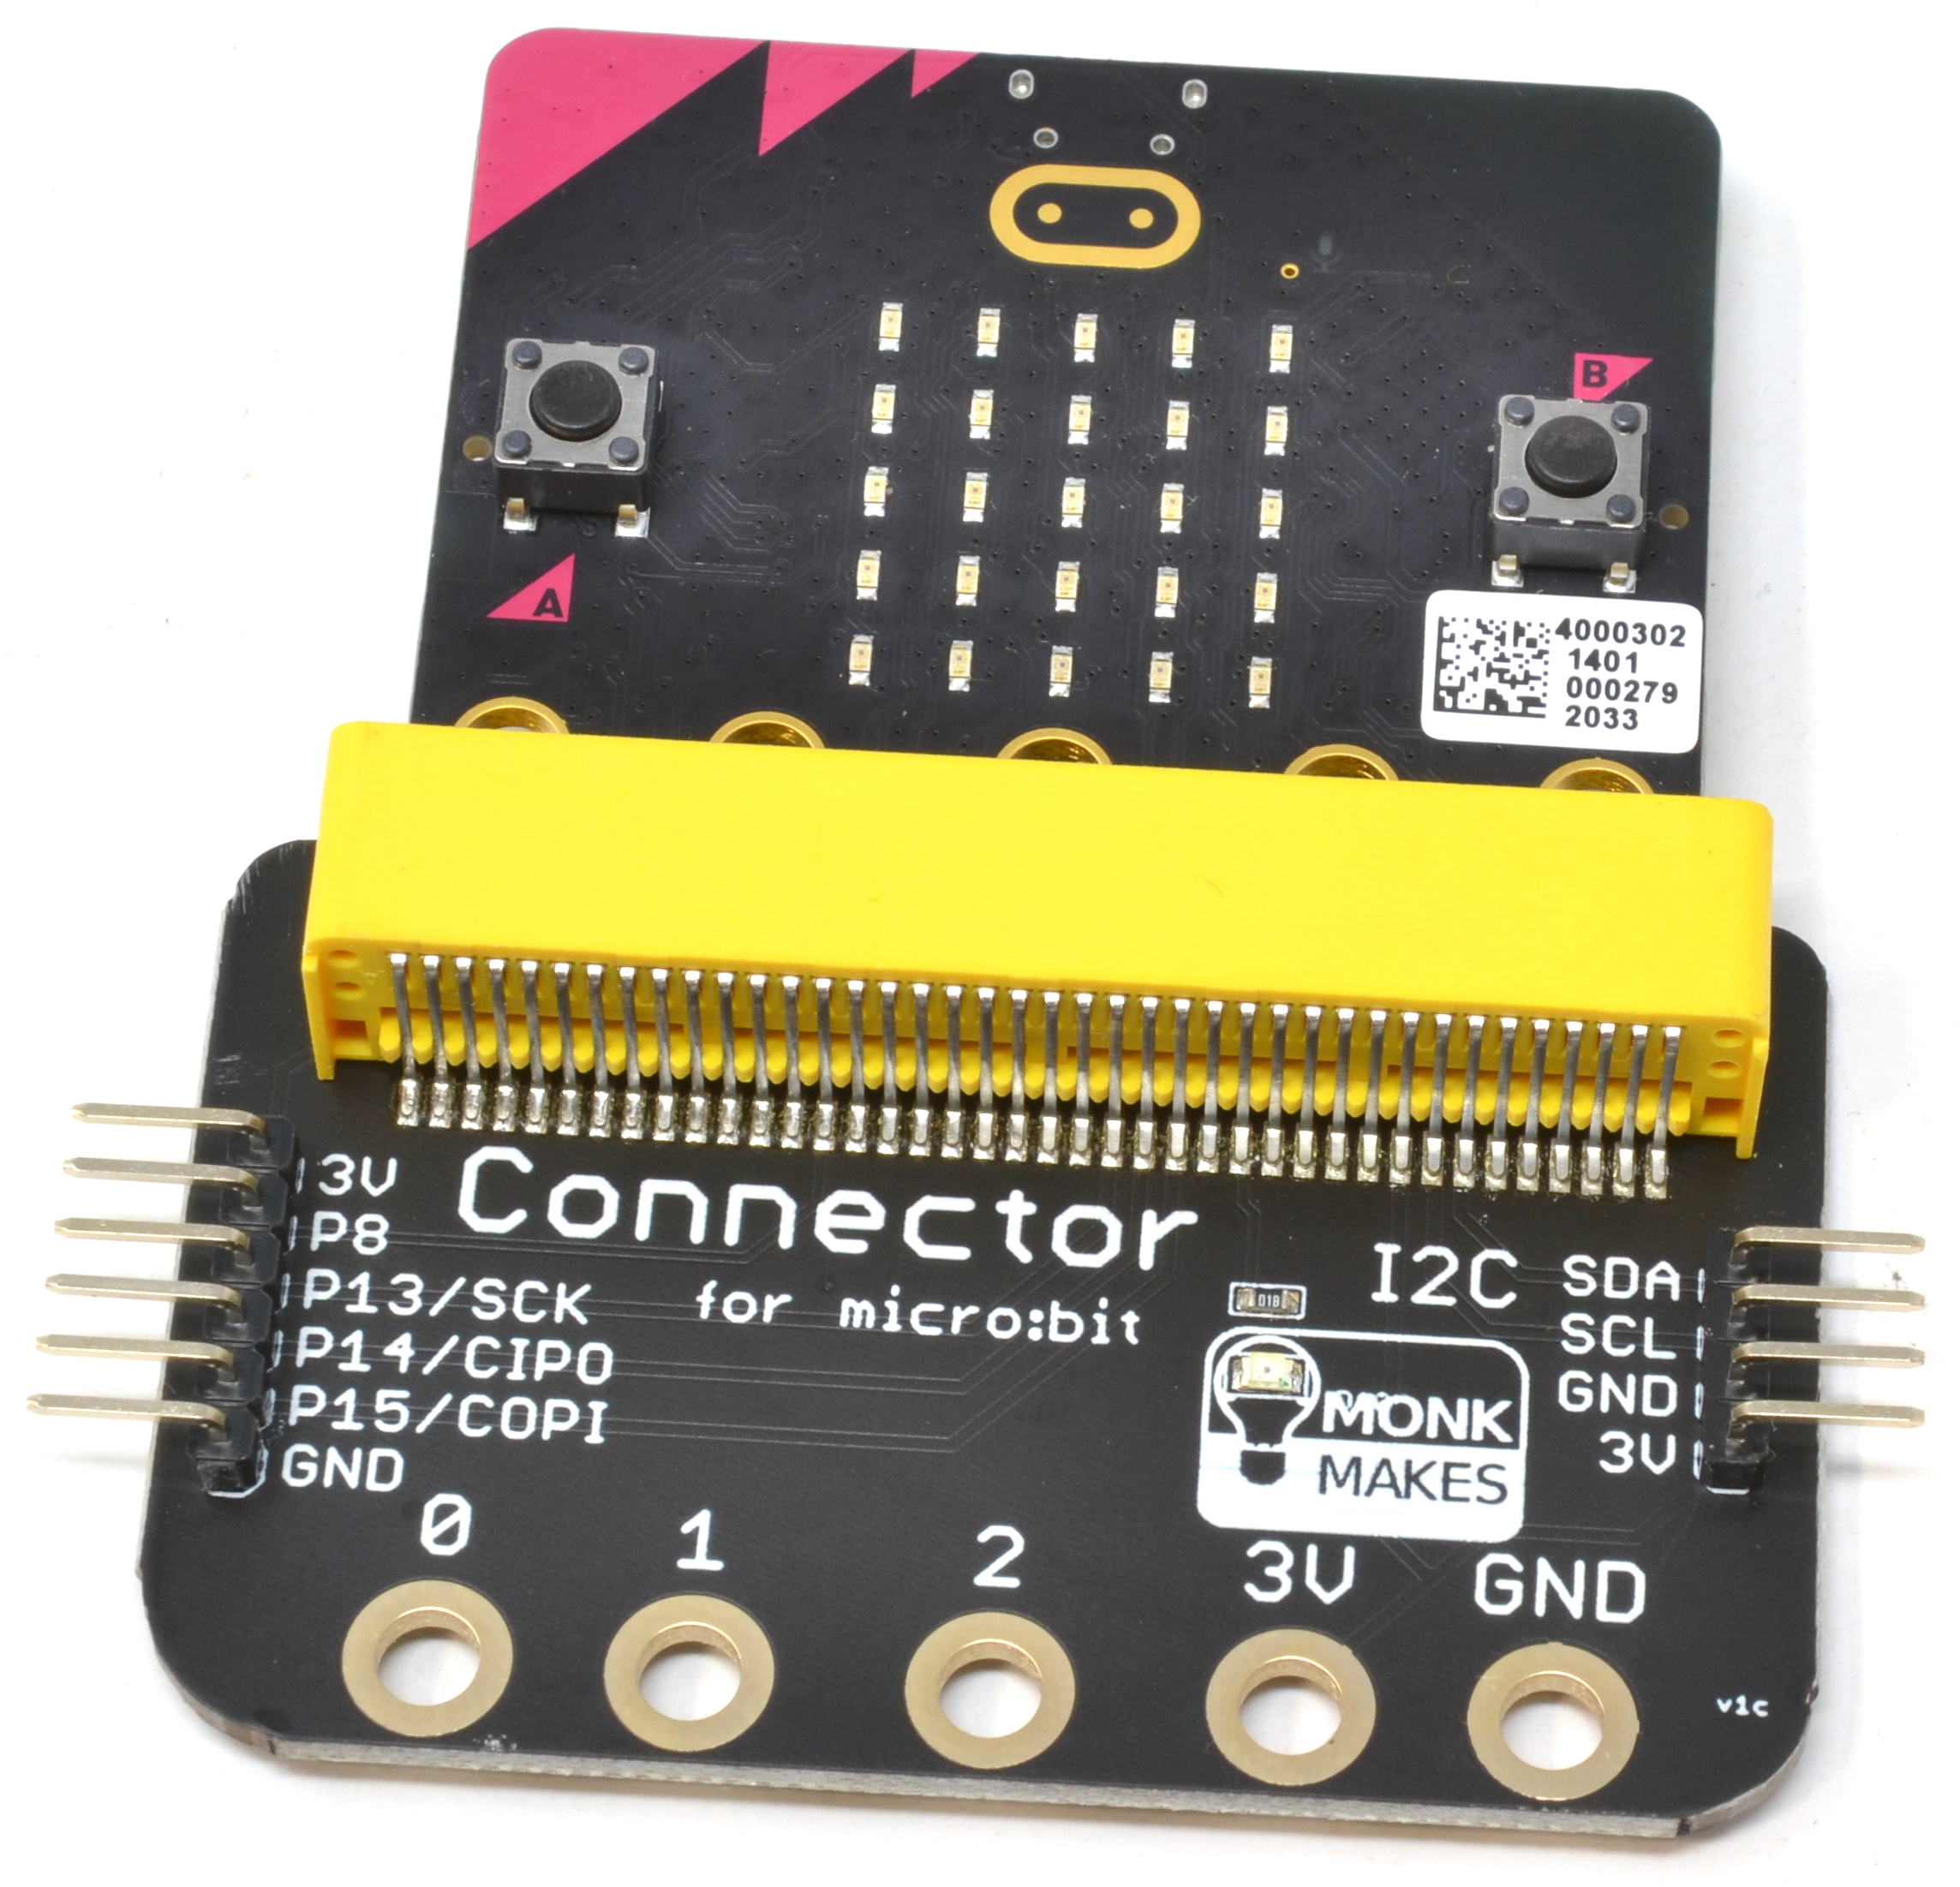 Connector for micro:bit